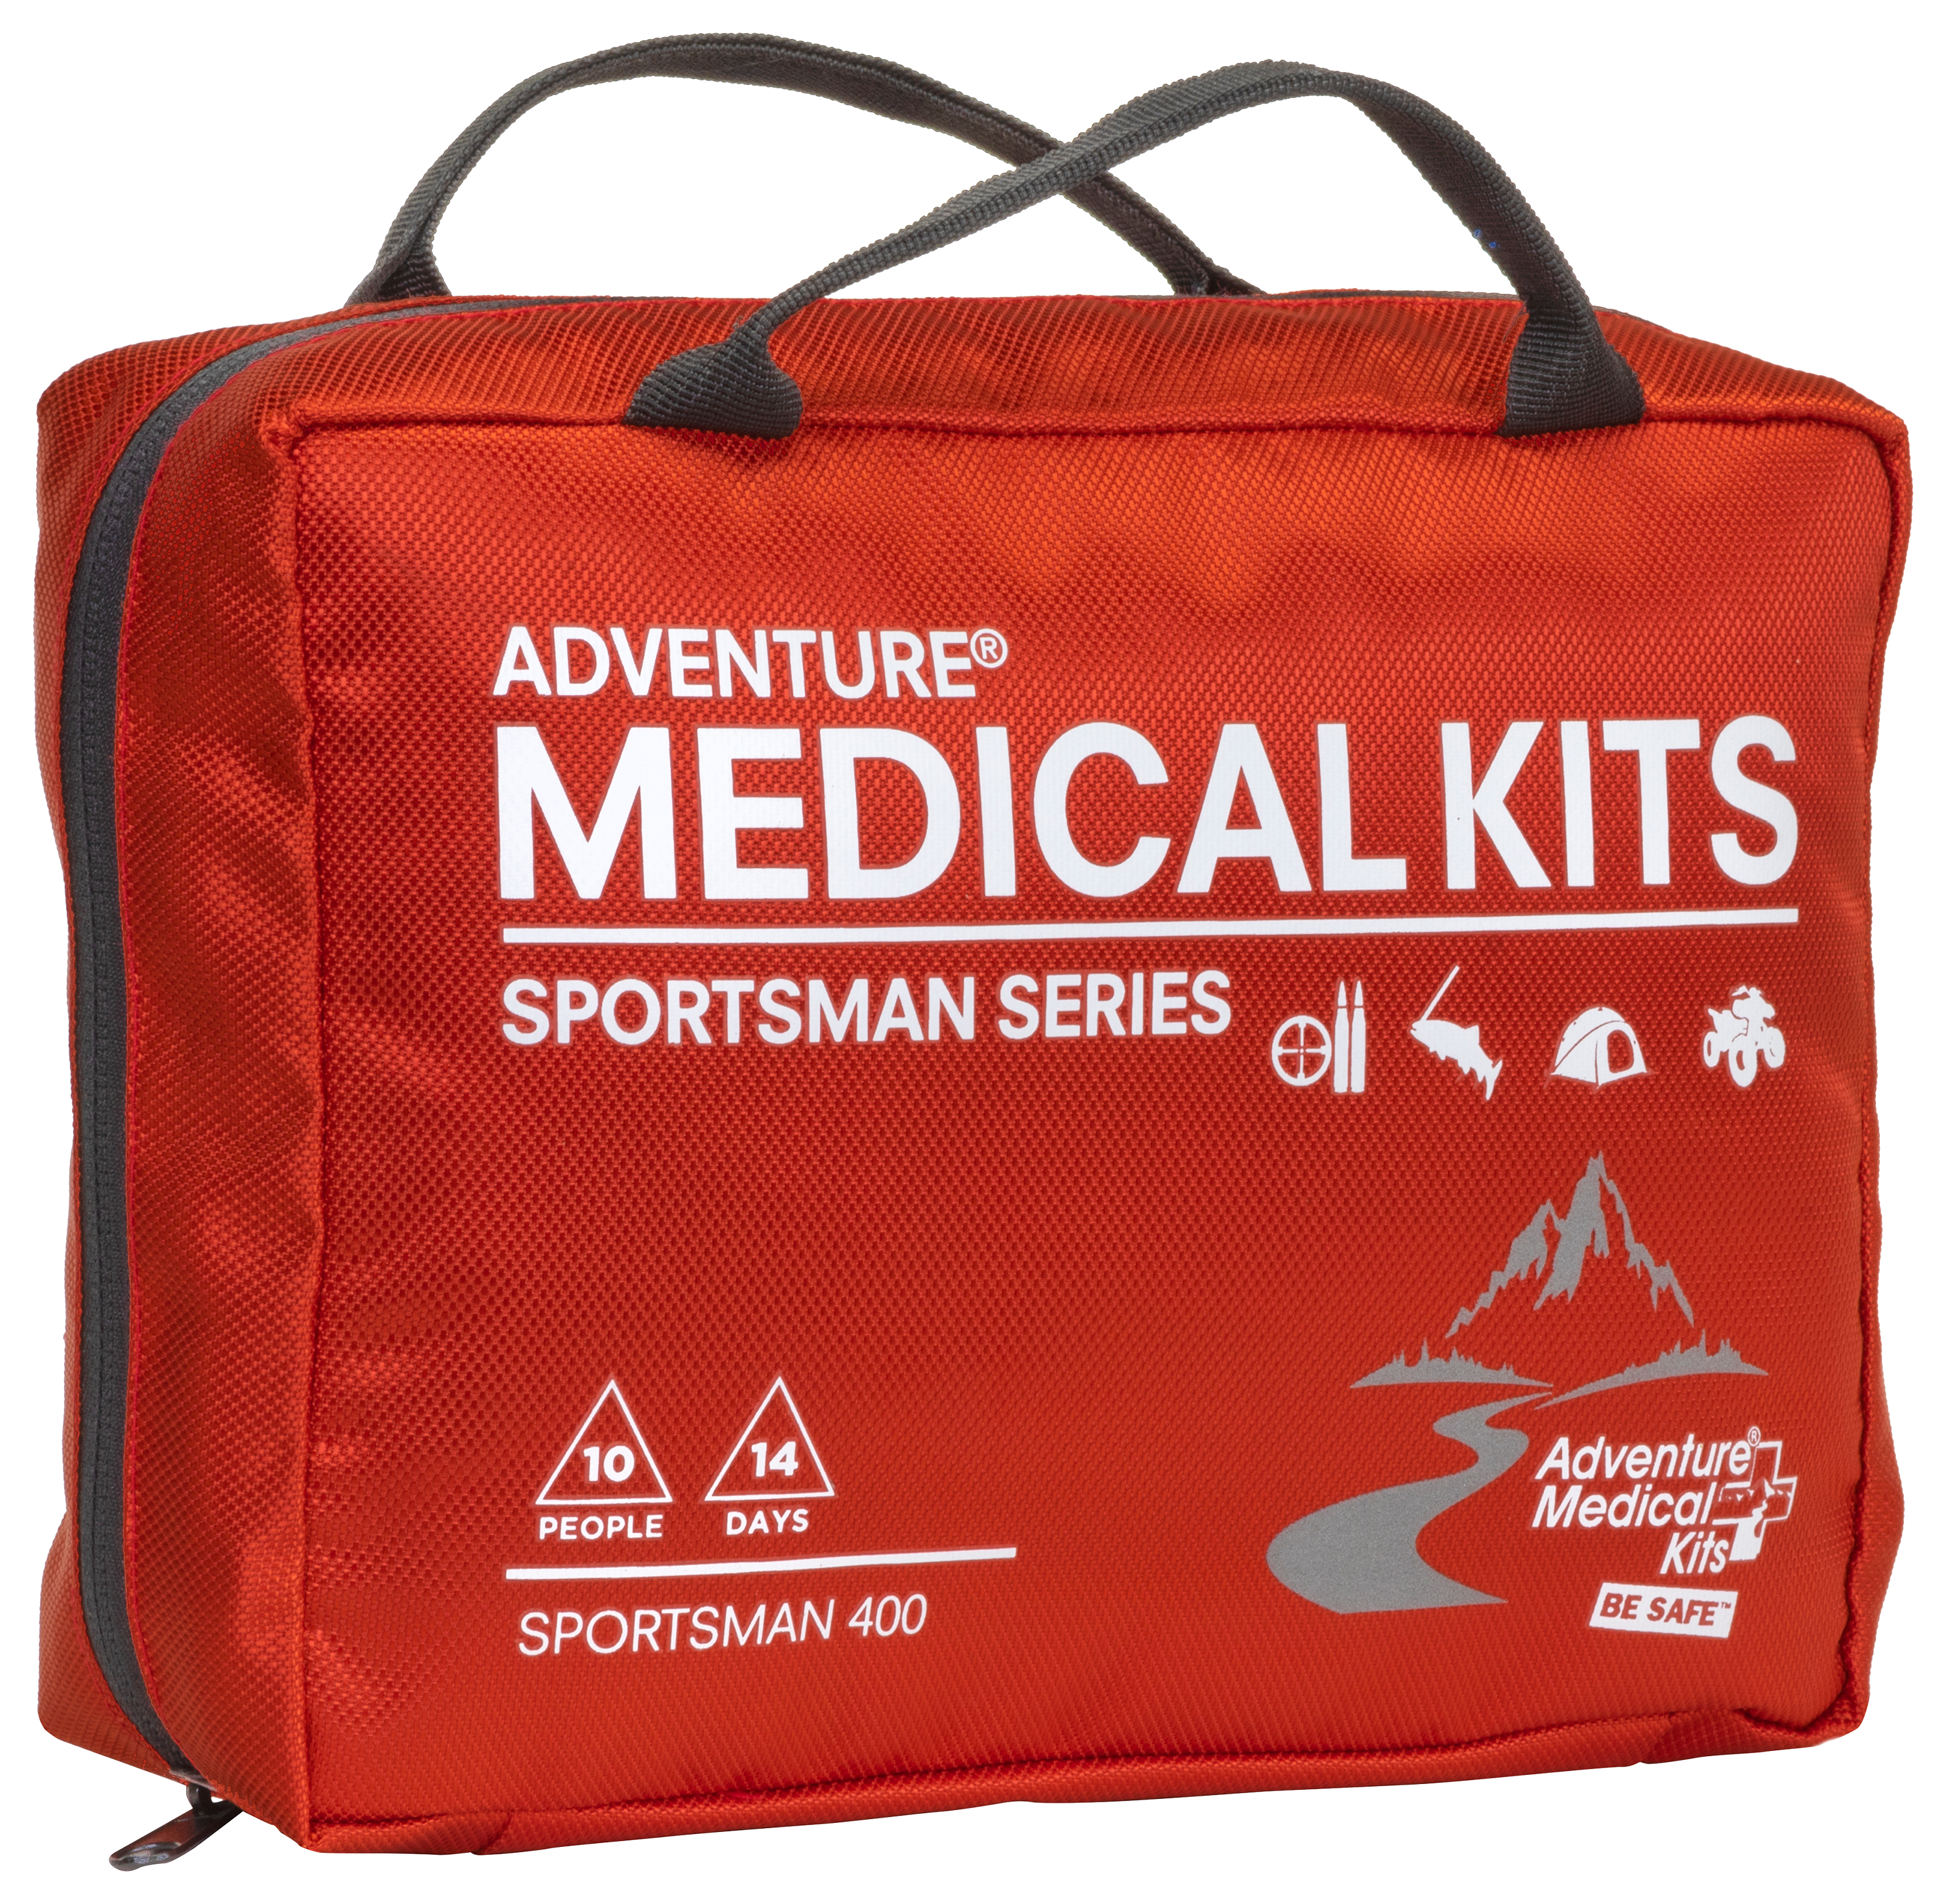 Guide to First Aid Kits - Different types & contents of First Aid